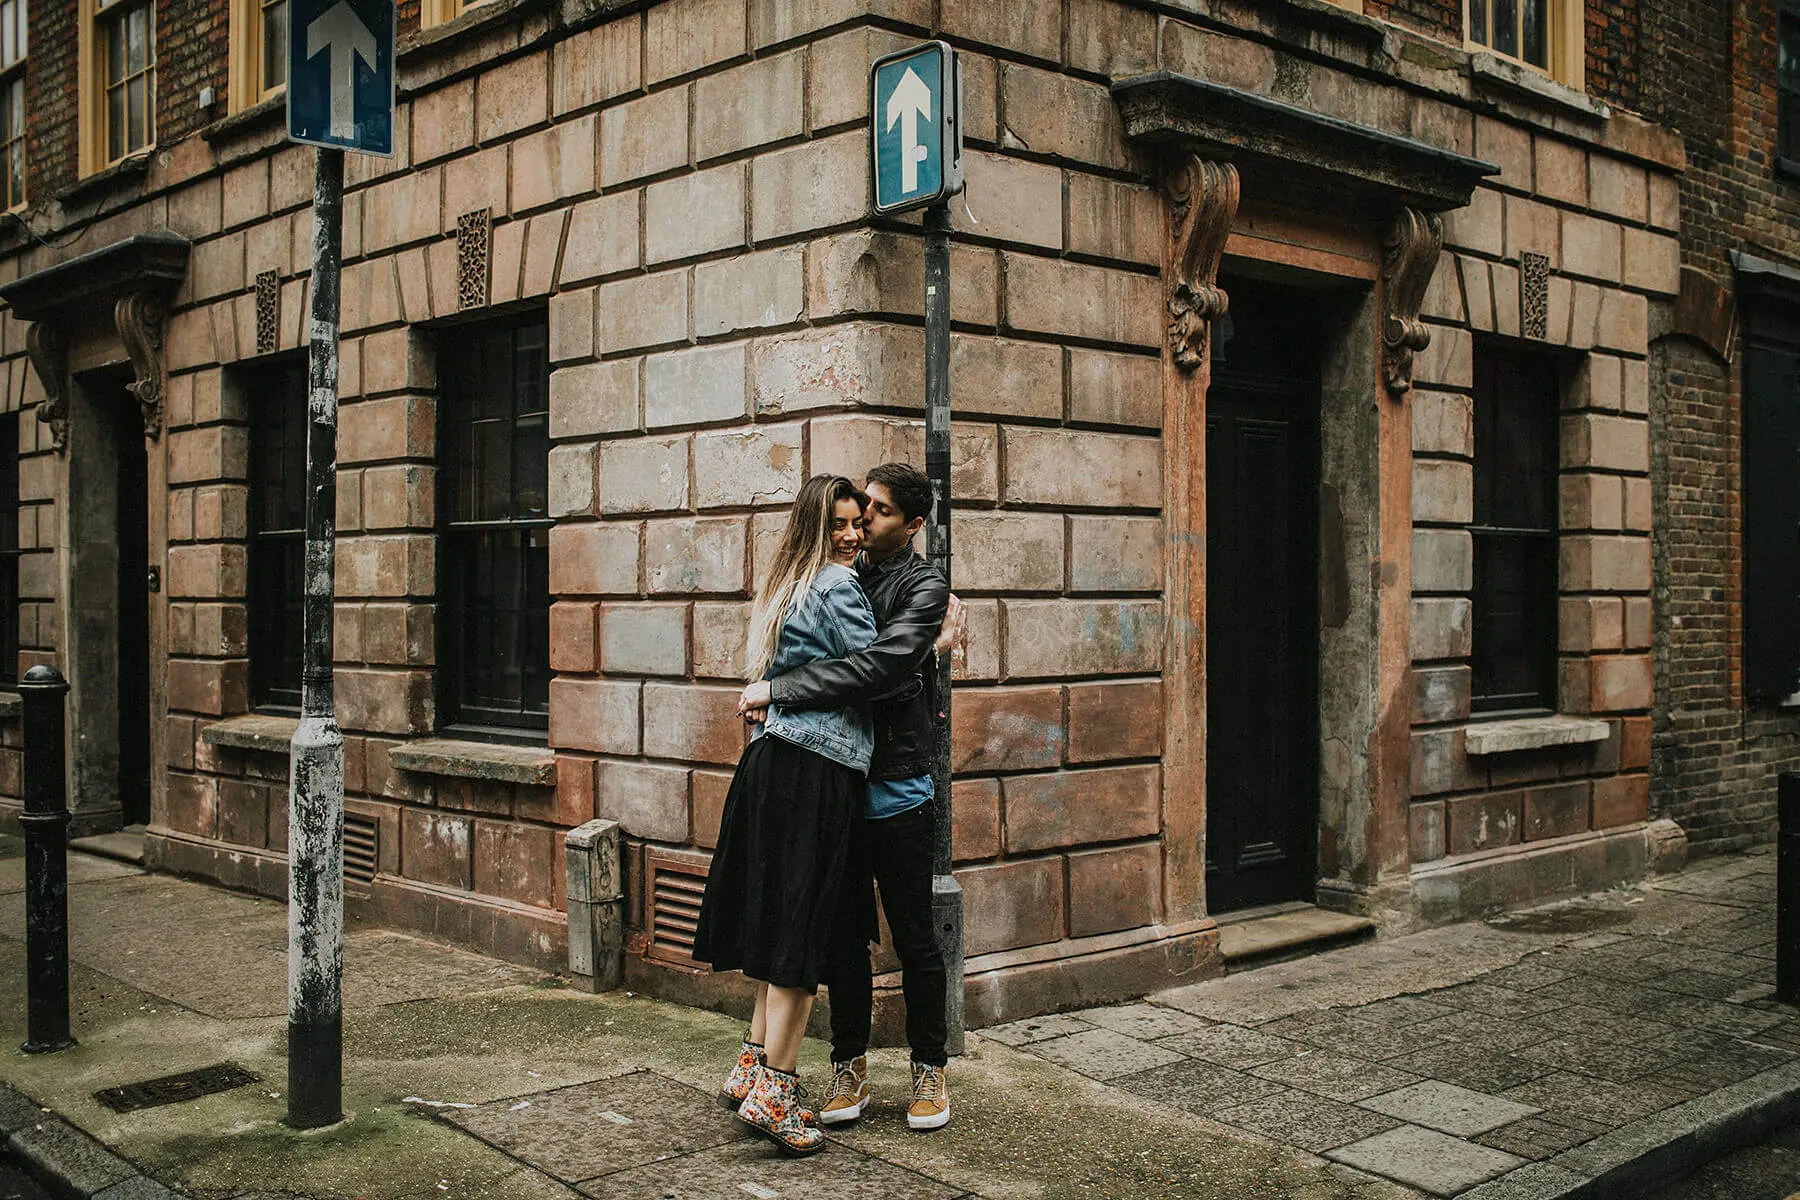  In an old city alley, a couple shares an embrace on the cobblestone sidewalk. The woman, in a black skirt and denim jacket, is smiling as she hugs the man, who is wearing a black leather jacket and jeans. Behind them, a vintage building with brown stone façade and barred windows adds a historical touch to the romantic scene. An arrow sign pointing upwards adds a symbolic element to the composition.